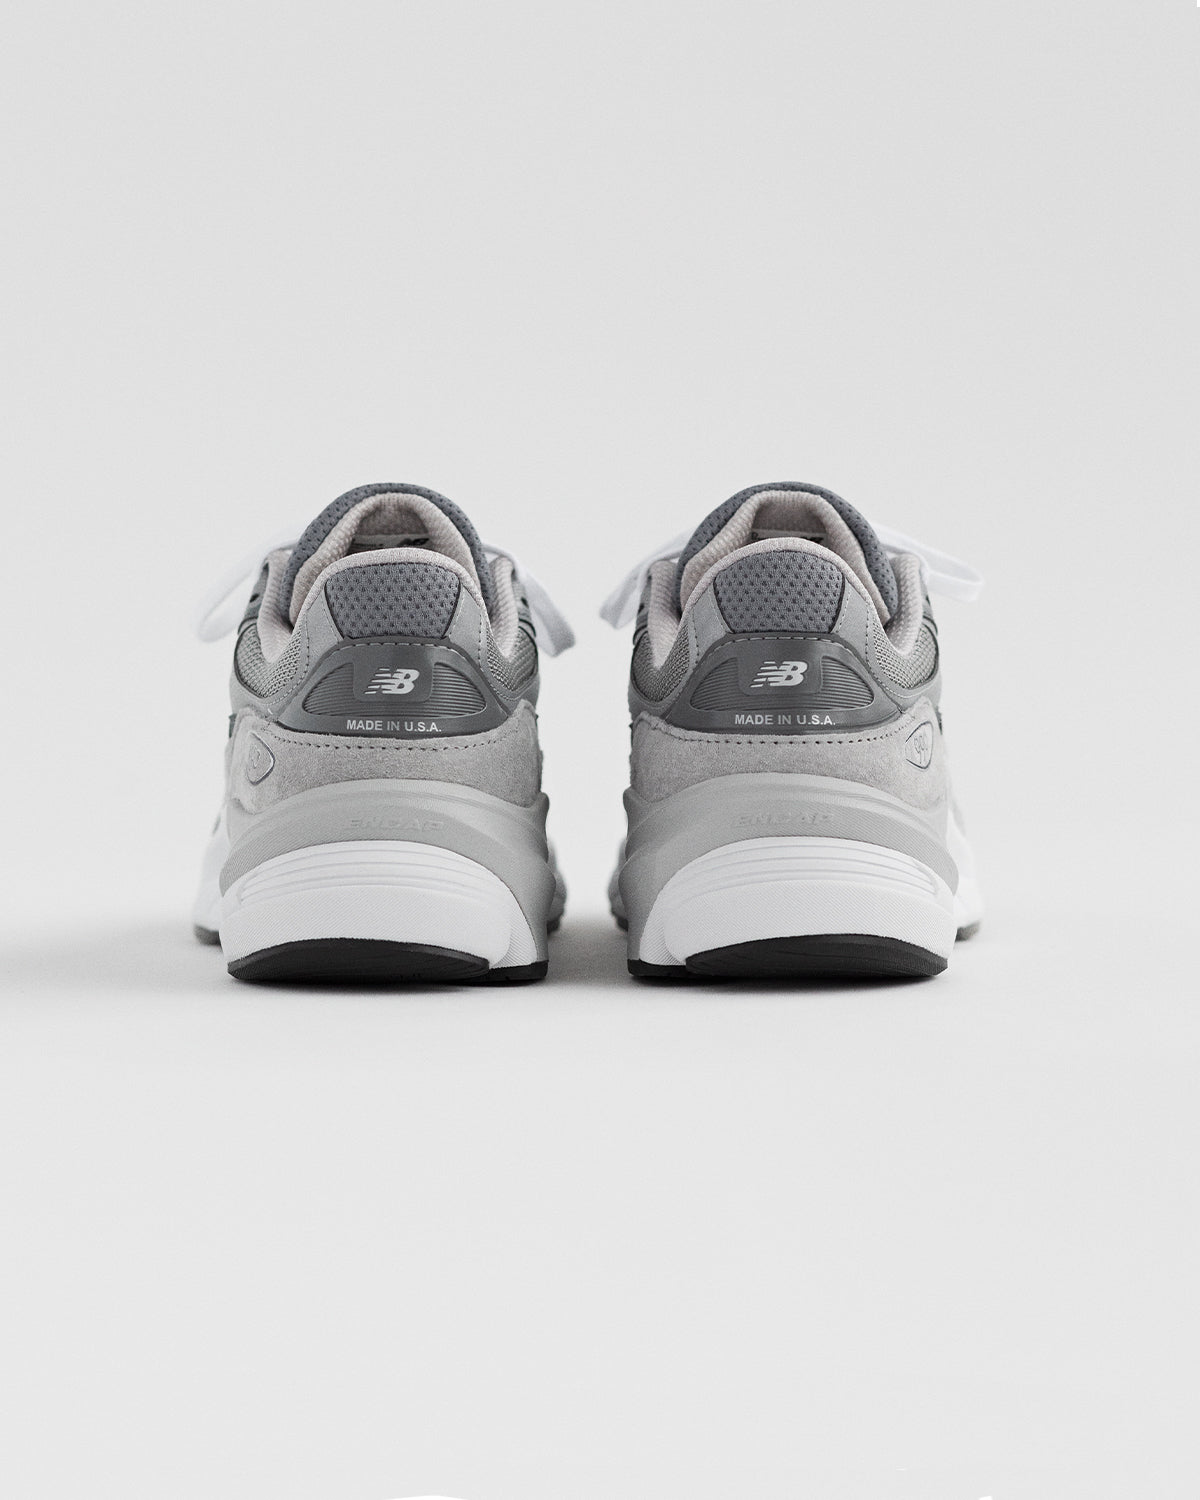 New Balance W's 990v6 Grey Shoes Sneakers Women